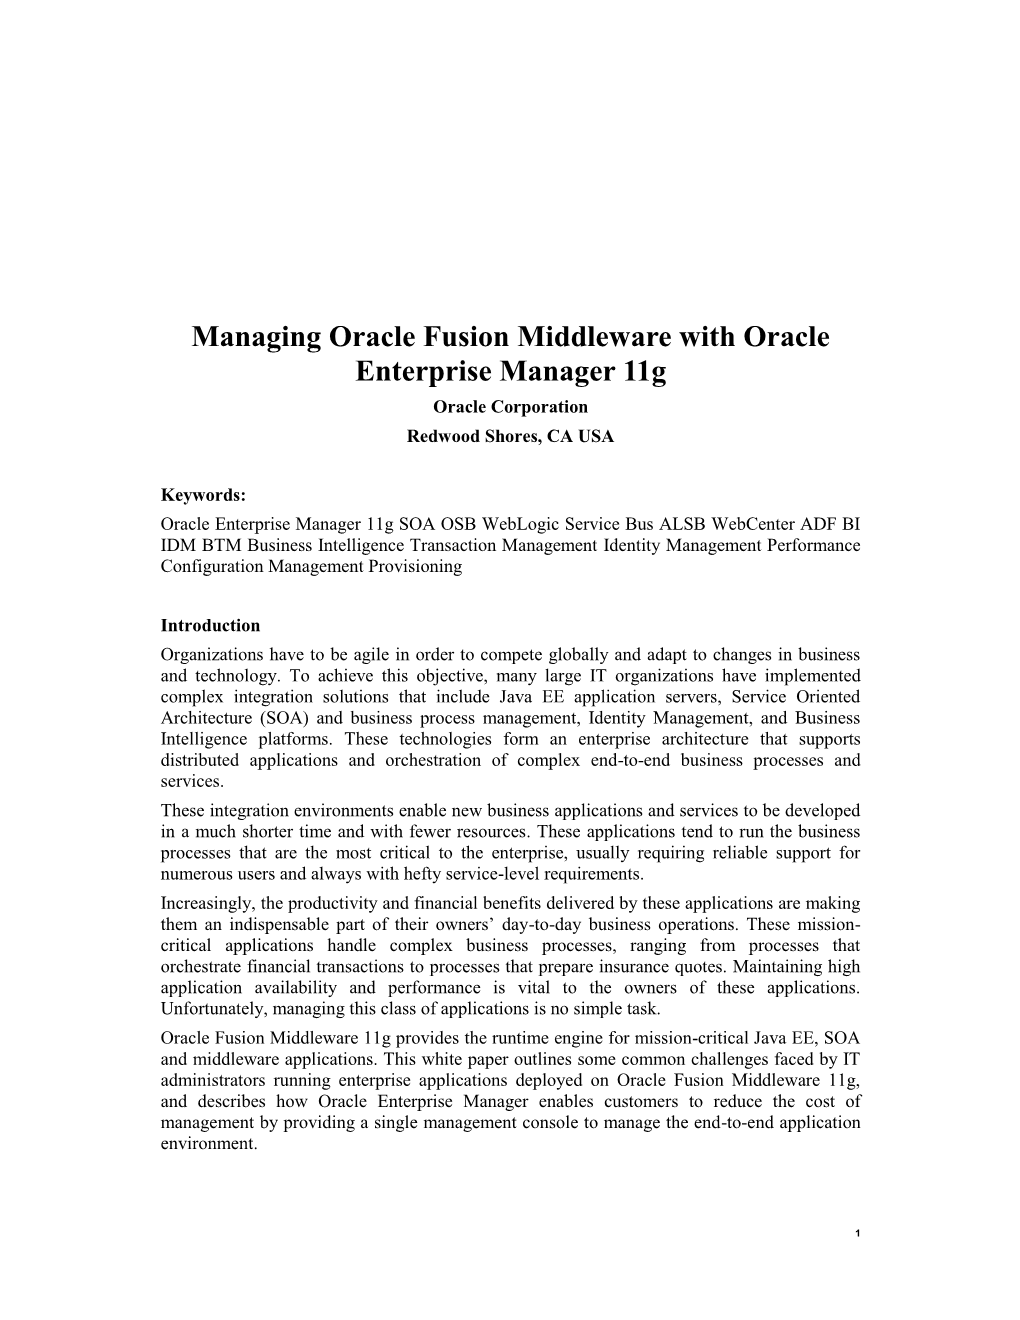 Managing Oracle Fusion Middleware with Oracle Enterprise Manager 11G Oracle Corporation Redwood Shores, CA USA